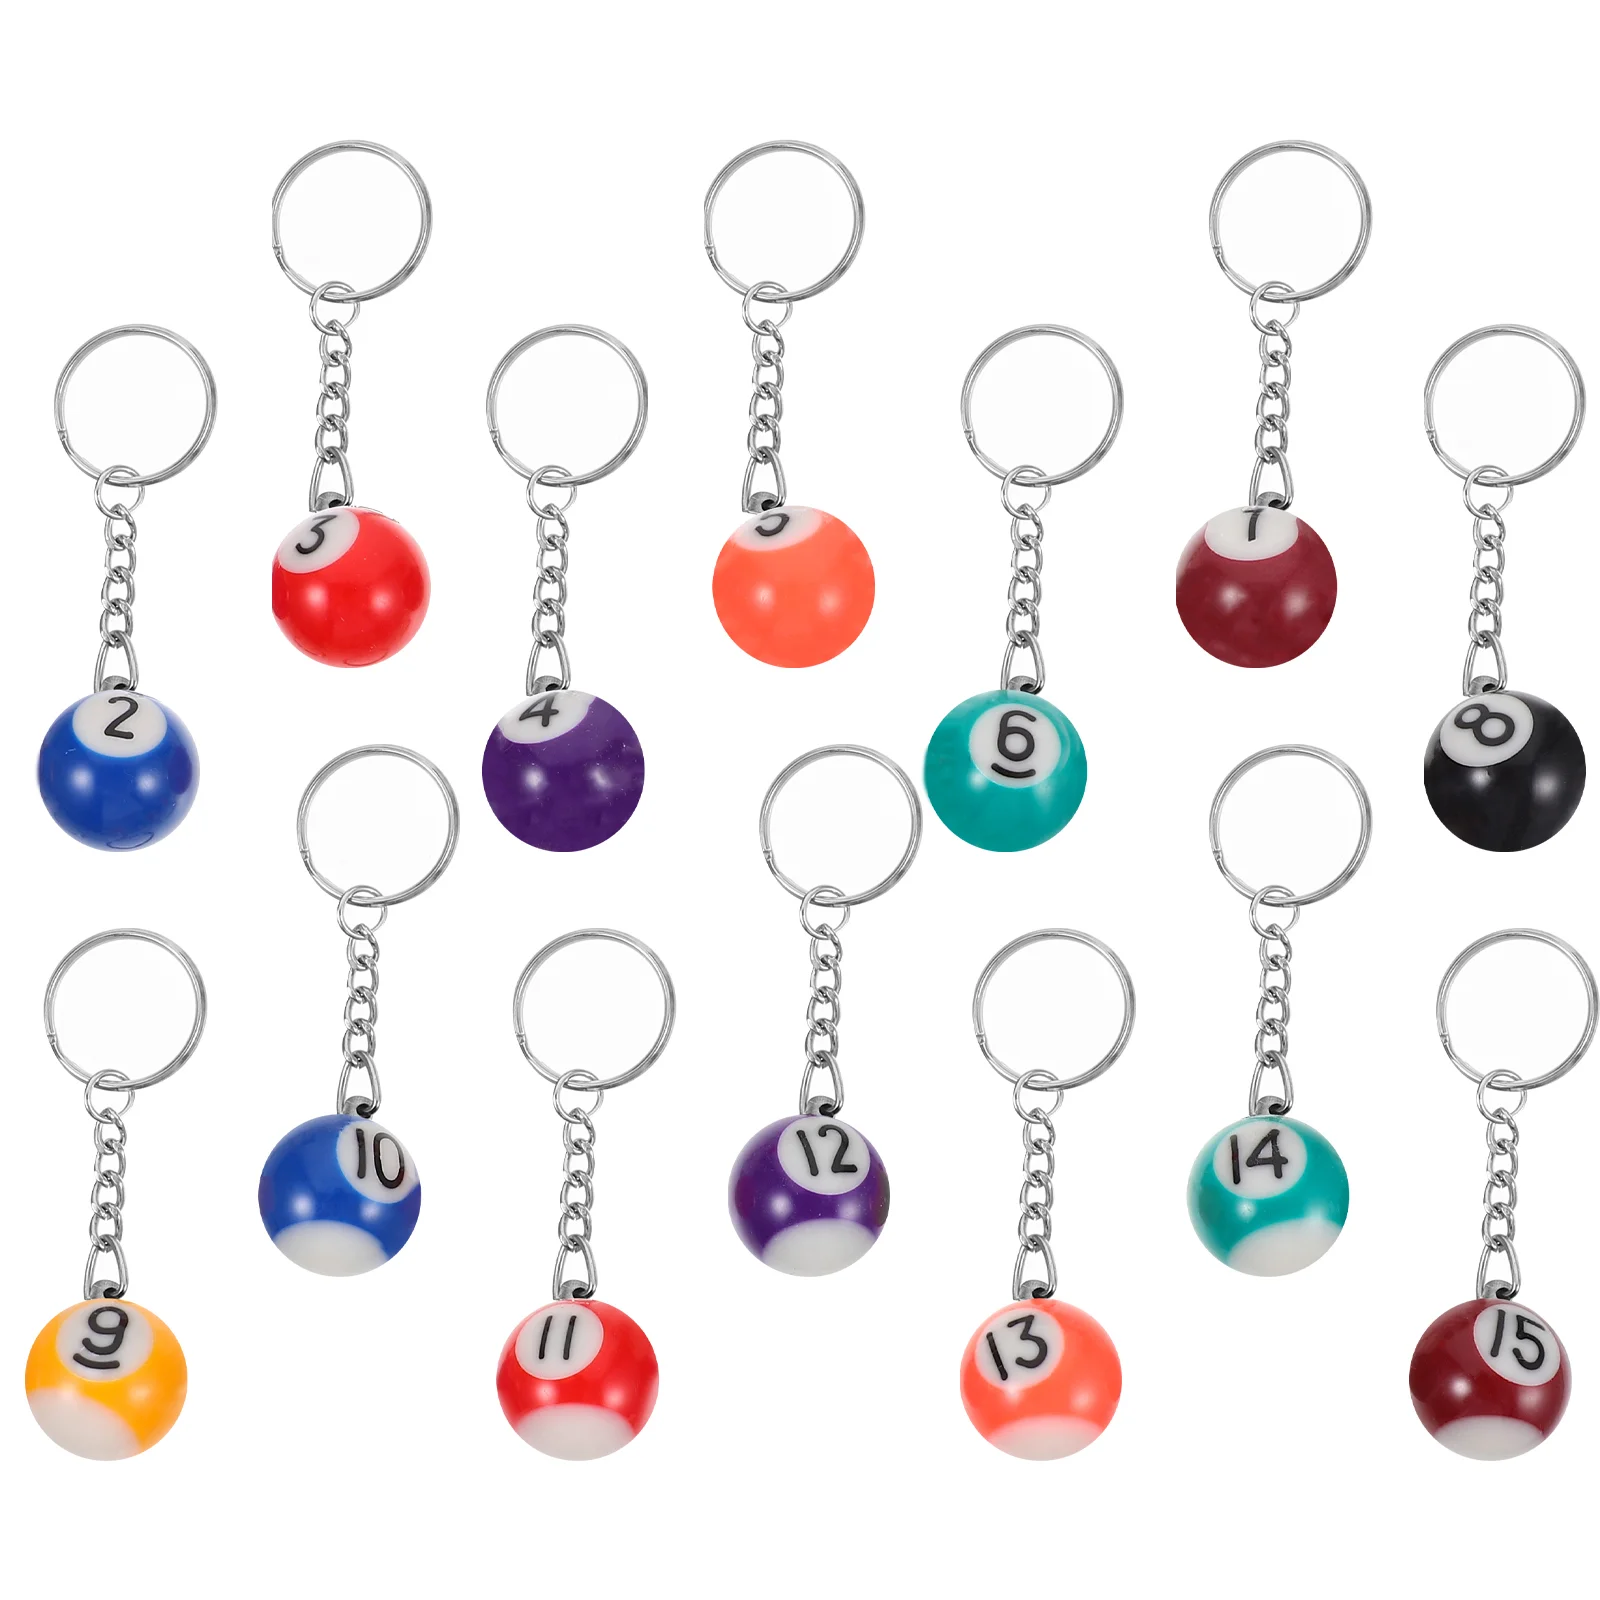 

16 Pcs Billiards Keychain Ball Small Keychains Adorable Pool Decors Keepsakes Gifts Resin Delicate